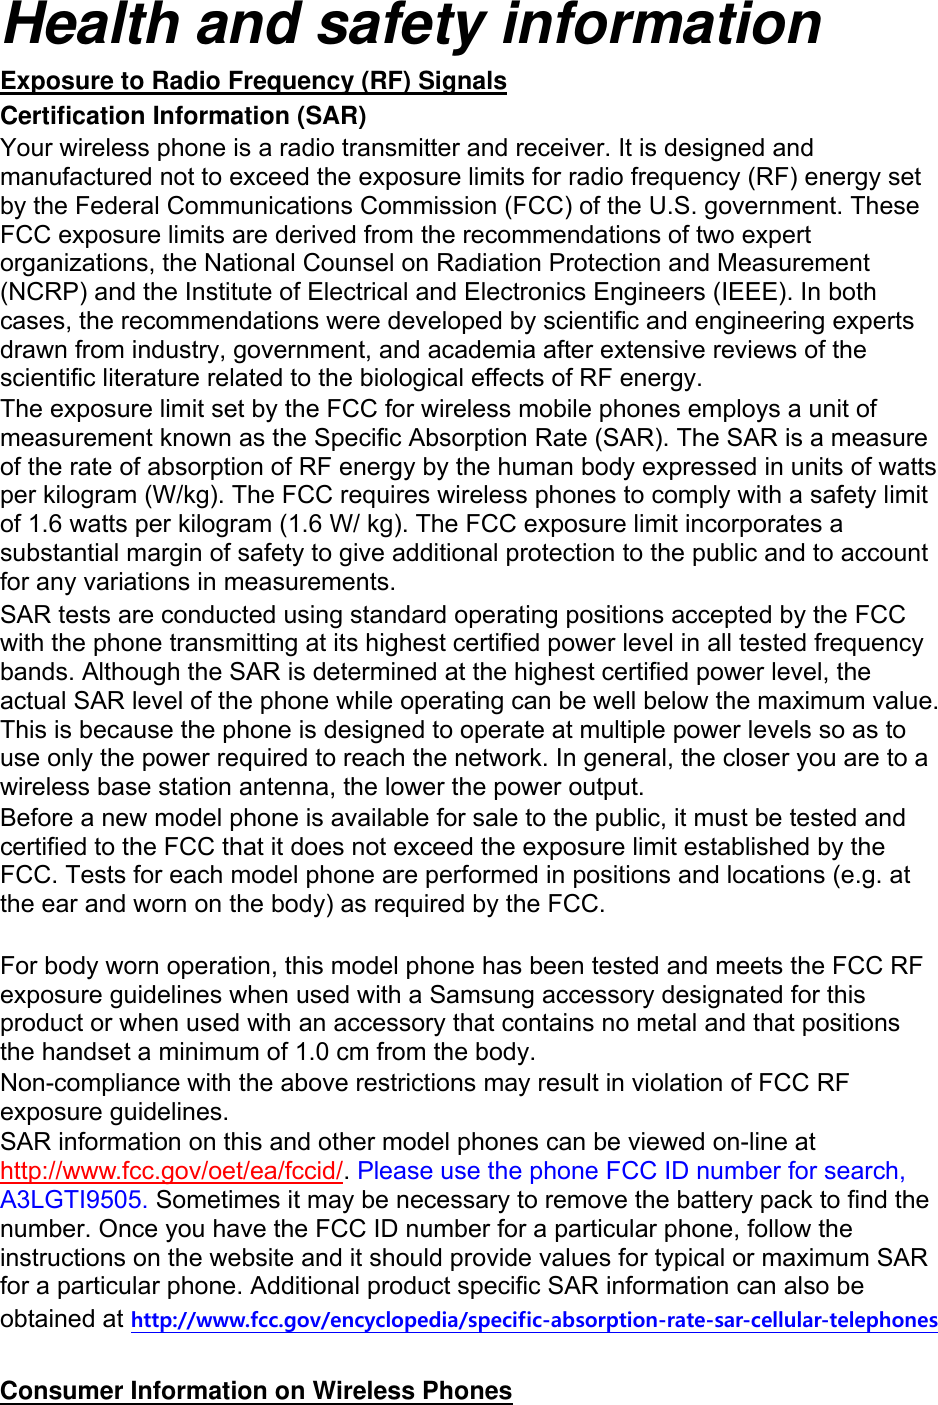 Health and safety information Exposure to Radio Frequency (RF) Signals Certification Information (SAR) Your wireless phone is a radio transmitter and receiver. It is designed and manufactured not to exceed the exposure limits for radio frequency (RF) energy set by the Federal Communications Commission (FCC) of the U.S. government. These FCC exposure limits are derived from the recommendations of two expert organizations, the National Counsel on Radiation Protection and Measurement (NCRP) and the Institute of Electrical and Electronics Engineers (IEEE). In both cases, the recommendations were developed by scientific and engineering experts drawn from industry, government, and academia after extensive reviews of the scientific literature related to the biological effects of RF energy. The exposure limit set by the FCC for wireless mobile phones employs a unit of measurement known as the Specific Absorption Rate (SAR). The SAR is a measure of the rate of absorption of RF energy by the human body expressed in units of watts per kilogram (W/kg). The FCC requires wireless phones to comply with a safety limit of 1.6 watts per kilogram (1.6 W/ kg). The FCC exposure limit incorporates a substantial margin of safety to give additional protection to the public and to account for any variations in measurements. SAR tests are conducted using standard operating positions accepted by the FCC with the phone transmitting at its highest certified power level in all tested frequency bands. Although the SAR is determined at the highest certified power level, the actual SAR level of the phone while operating can be well below the maximum value. This is because the phone is designed to operate at multiple power levels so as to use only the power required to reach the network. In general, the closer you are to a wireless base station antenna, the lower the power output. Before a new model phone is available for sale to the public, it must be tested and certified to the FCC that it does not exceed the exposure limit established by the FCC. Tests for each model phone are performed in positions and locations (e.g. at the ear and worn on the body) as required by the FCC.      For body worn operation, this model phone has been tested and meets the FCC RF exposure guidelines when used with a Samsung accessory designated for this product or when used with an accessory that contains no metal and that positions the handset a minimum of 1.0 cm from the body.   Non-compliance with the above restrictions may result in violation of FCC RF exposure guidelines. SAR information on this and other model phones can be viewed on-line at http://www.fcc.gov/oet/ea/fccid/. Please use the phone FCC ID number for search, A3LGTI9505. Sometimes it may be necessary to remove the battery pack to find the number. Once you have the FCC ID number for a particular phone, follow the instructions on the website and it should provide values for typical or maximum SAR for a particular phone. Additional product specific SAR information can also be obtained at http://www.fcc.gov/encyclopedia/specific-absorption-rate-sar-cellular-telephones  Consumer Information on Wireless Phones 